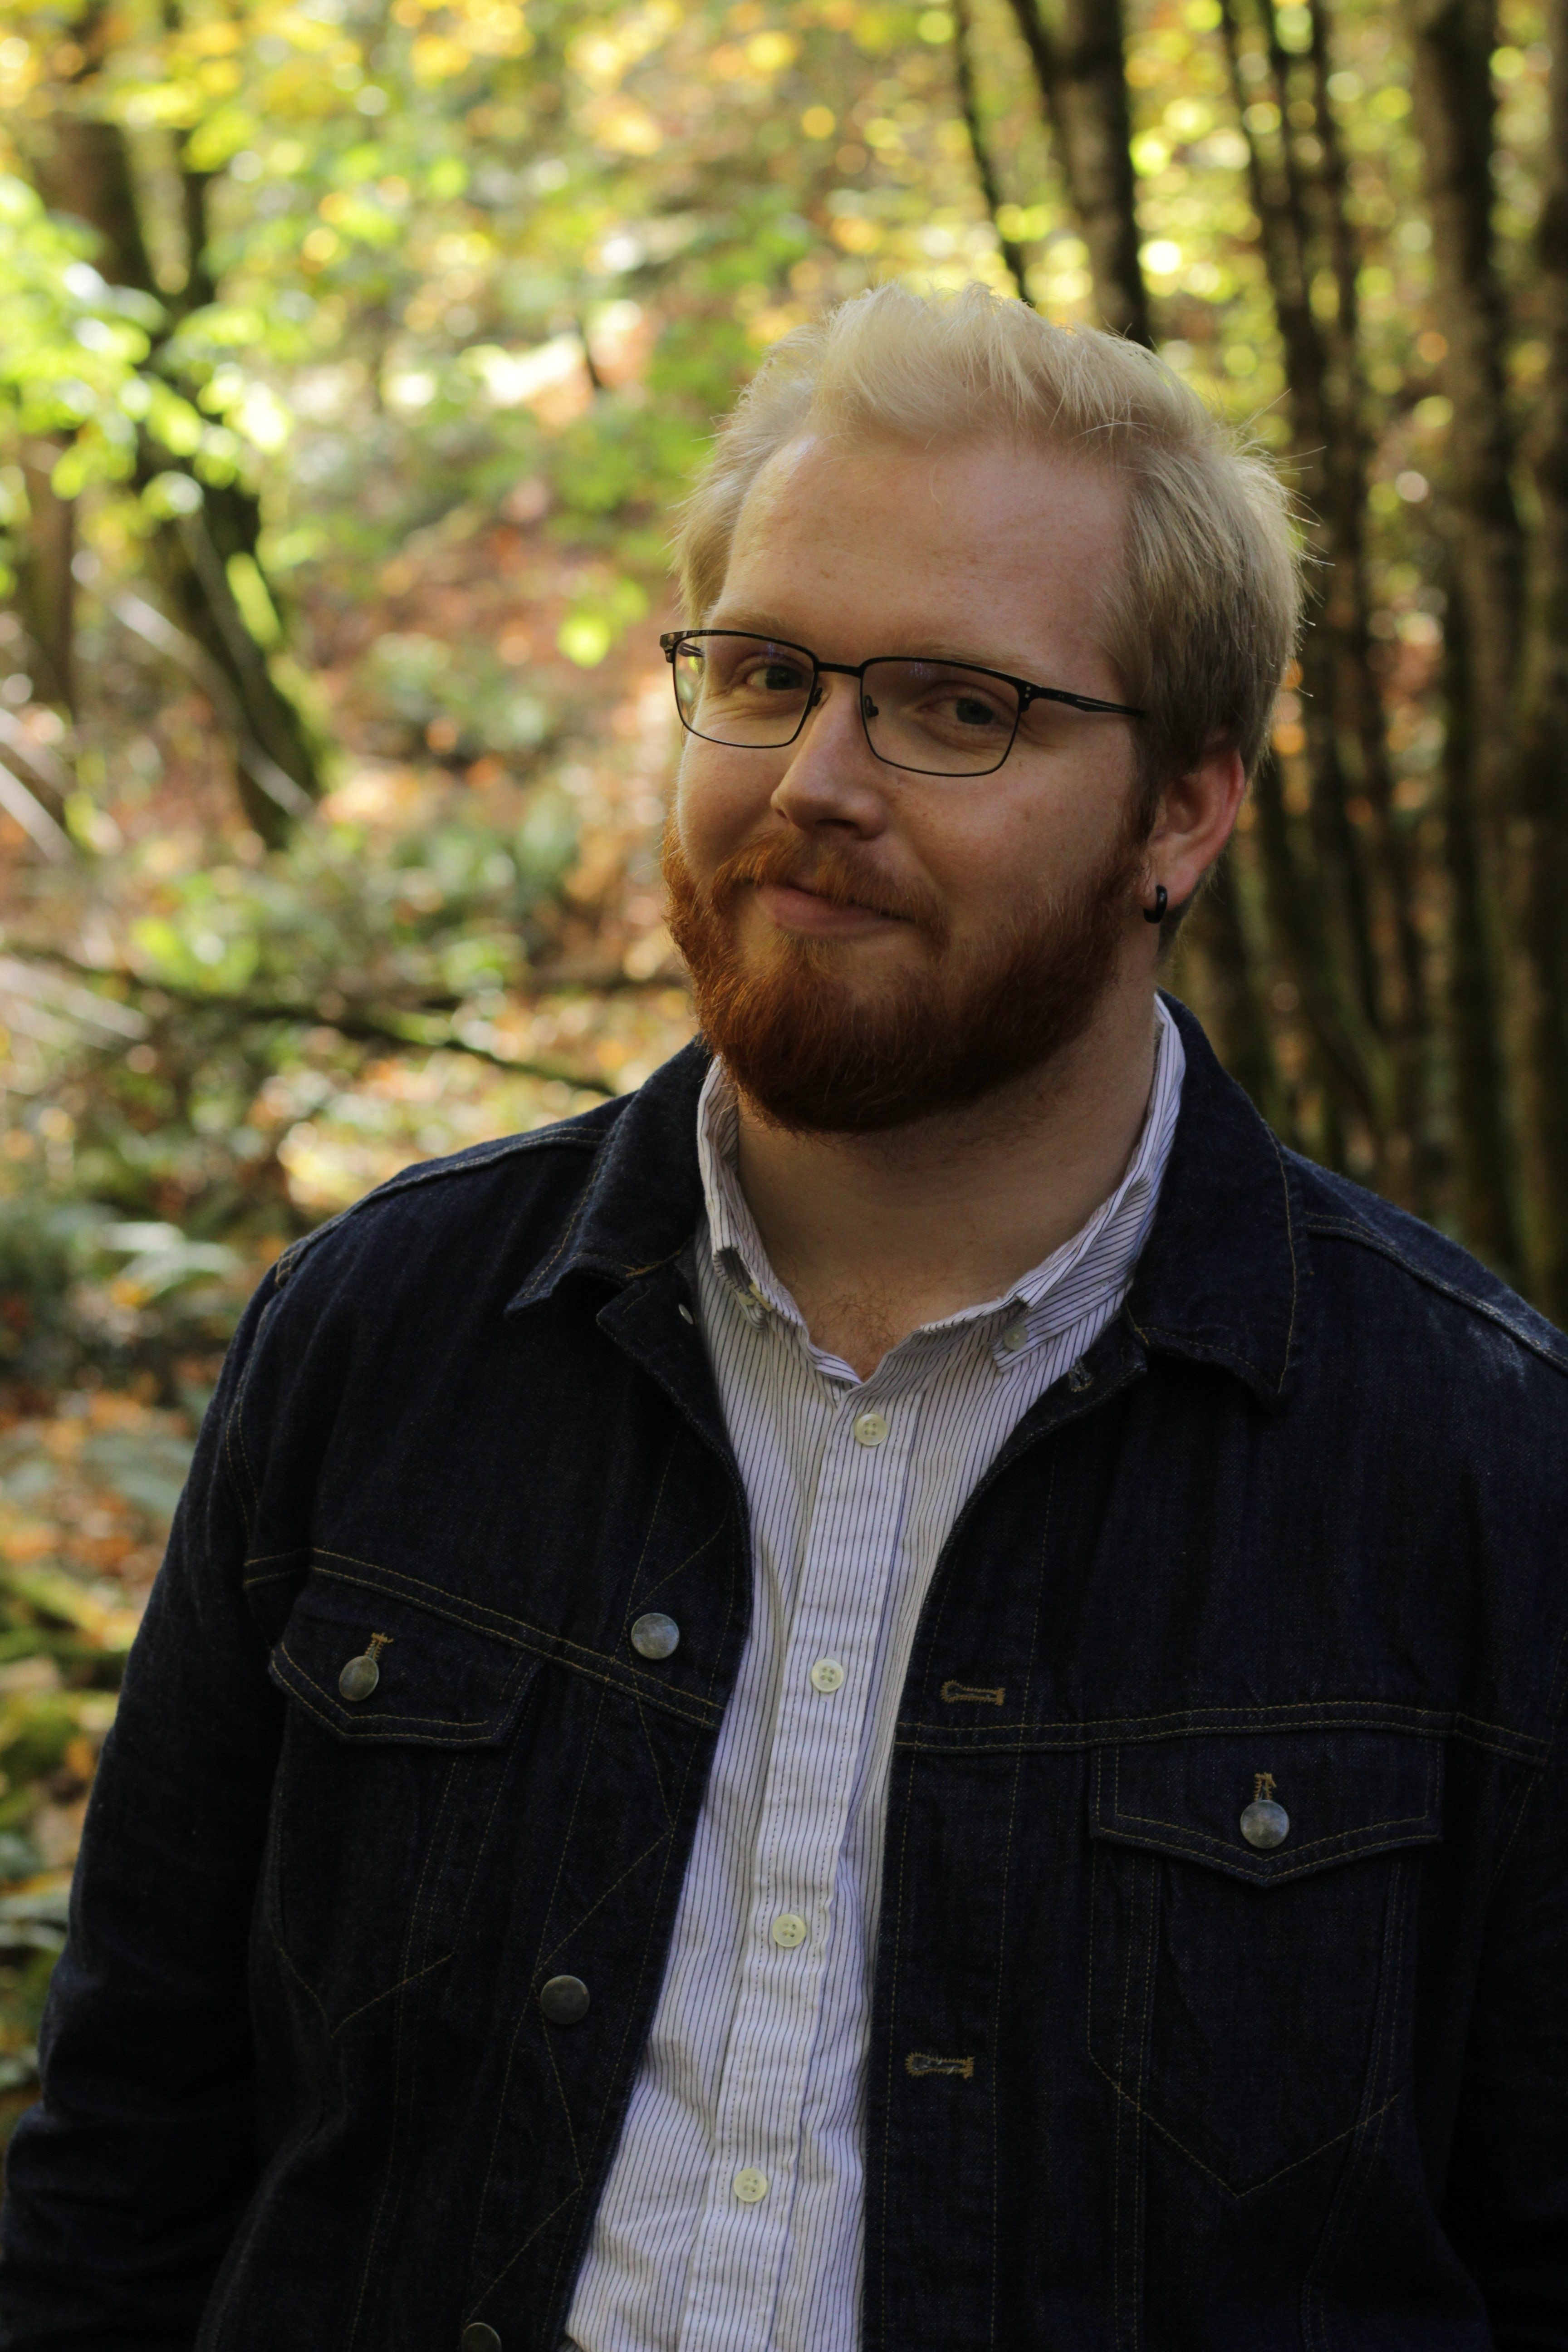 blonde person with glasses and a red beard smirking in a forest pictured from the waist up wearing a dark blue denim jacket and a pinstriped white shirt underneat